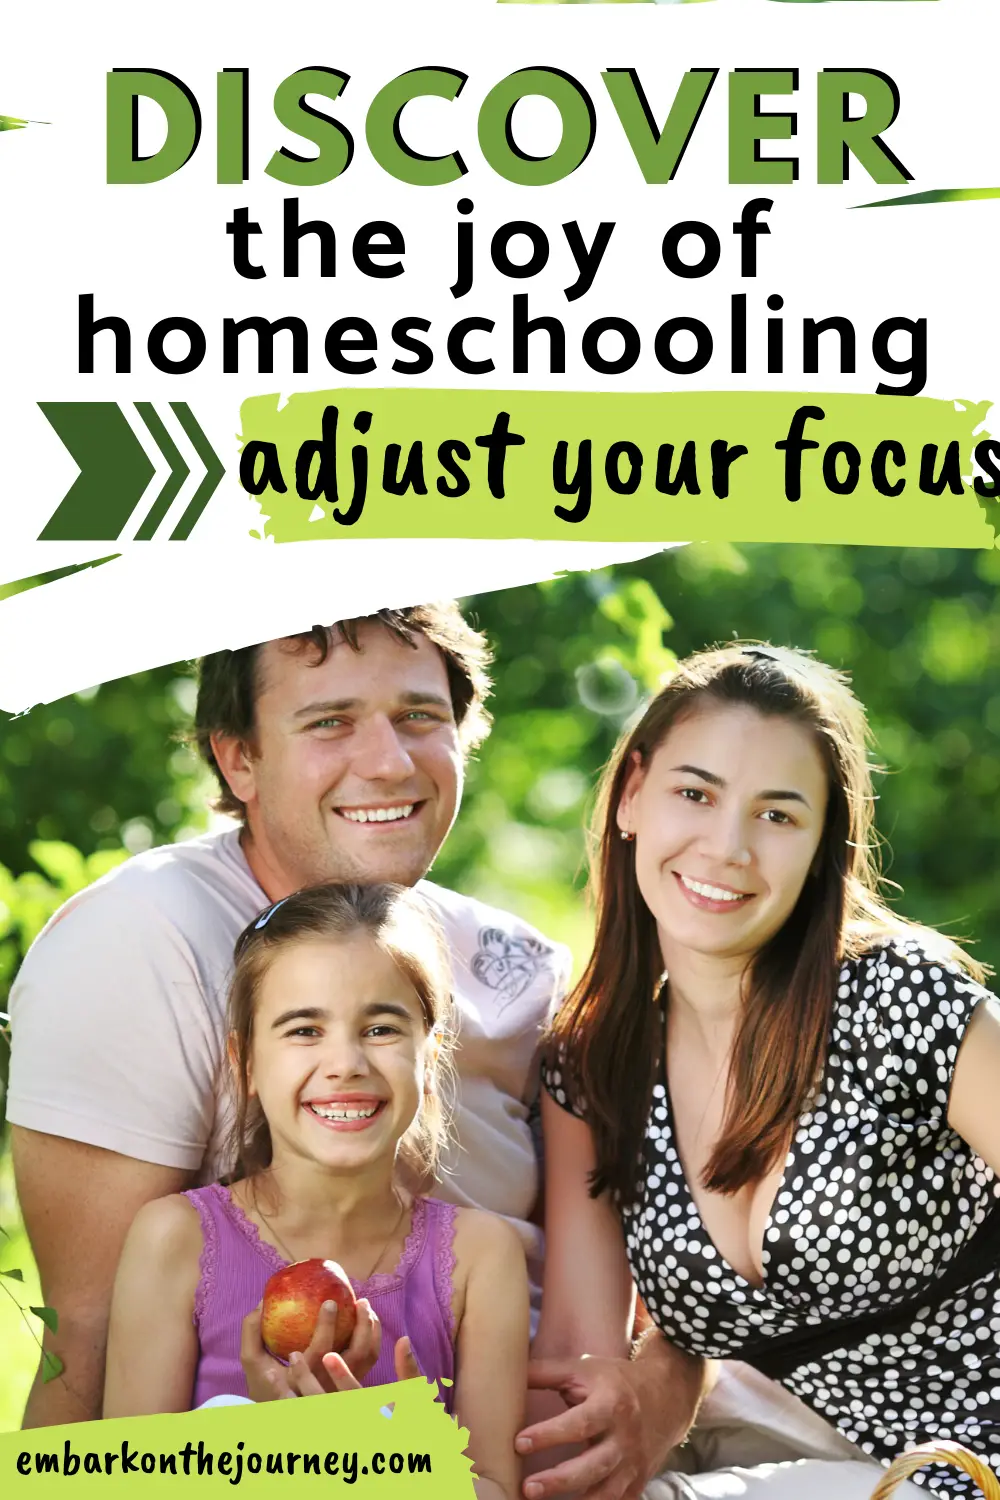 With so much on our plates, it’s easy to get lost in the everyday tasks of being at home – cleaning the house, fixing dinner, homeschooling, etc. How can we adjust our focus and rediscover the joy of homeschooling?